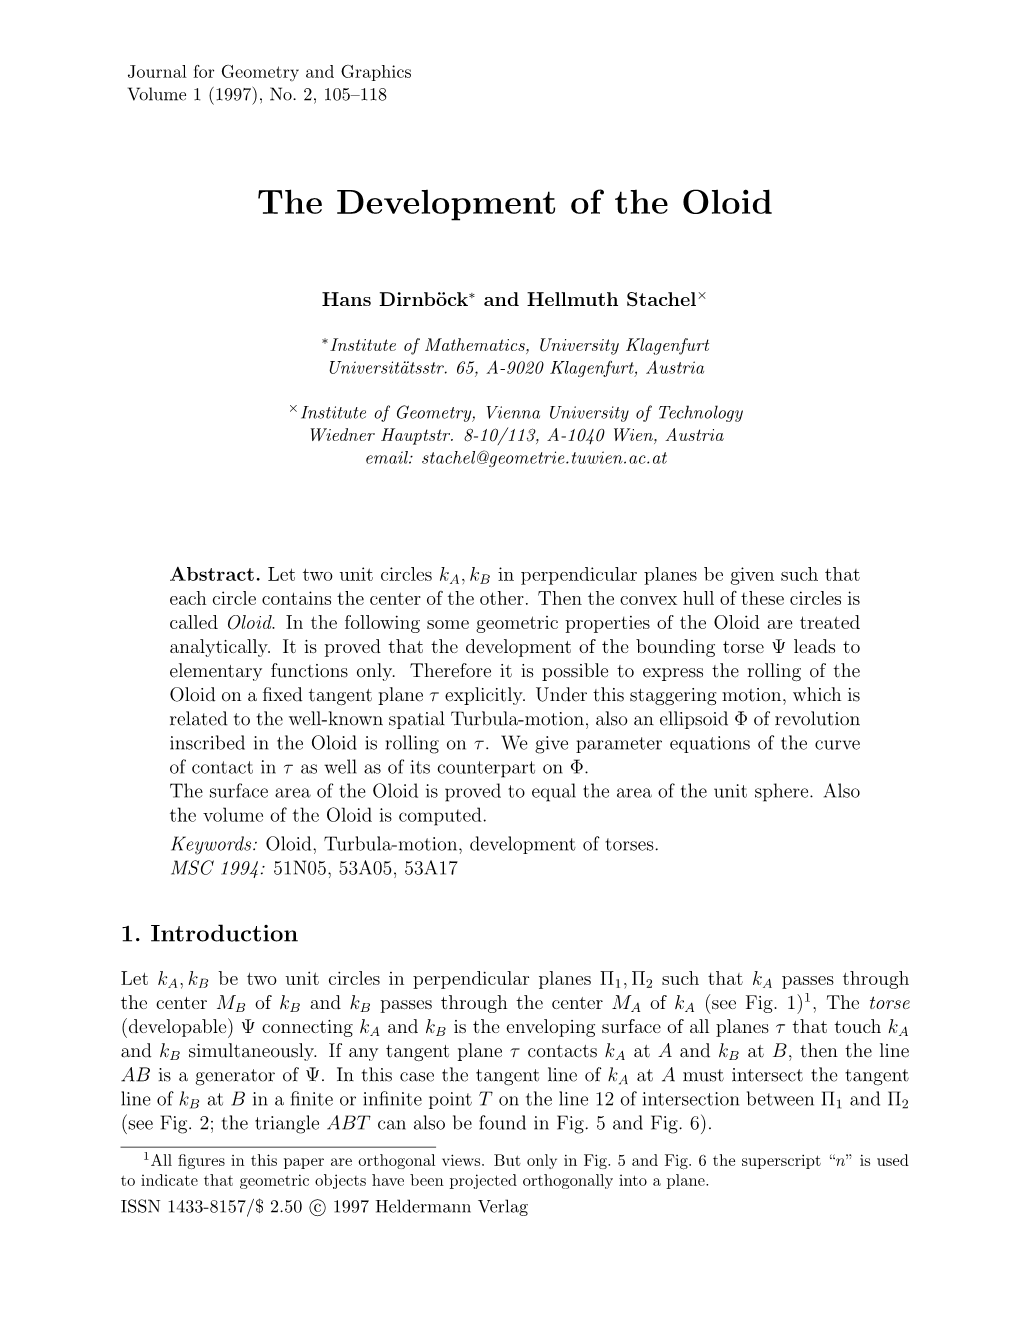 The Development of the Oloid